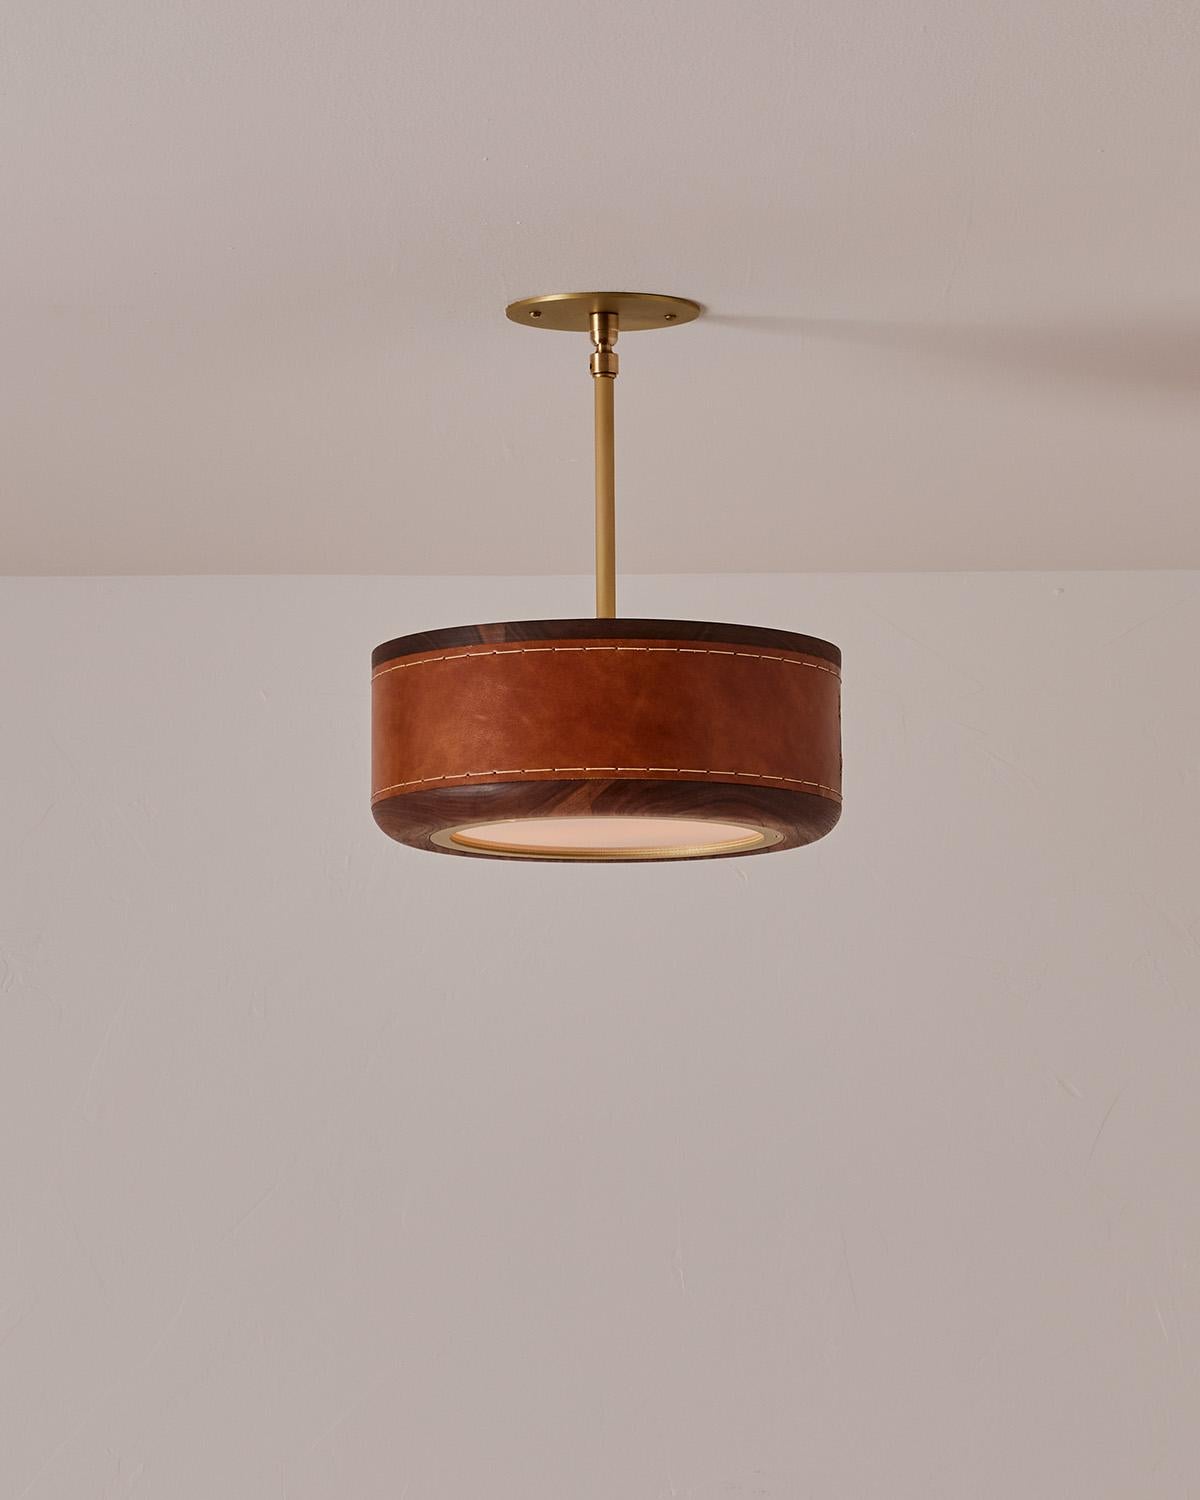 The Nura Ceiling Fixture combines hand-stitched leather over walnut accented by a brass pole and canopy. This fixture can either be hung as a ceiling surface mount or a pendant supported by a brass pole.

OVERALL DIMENSIONS
Shade: 12